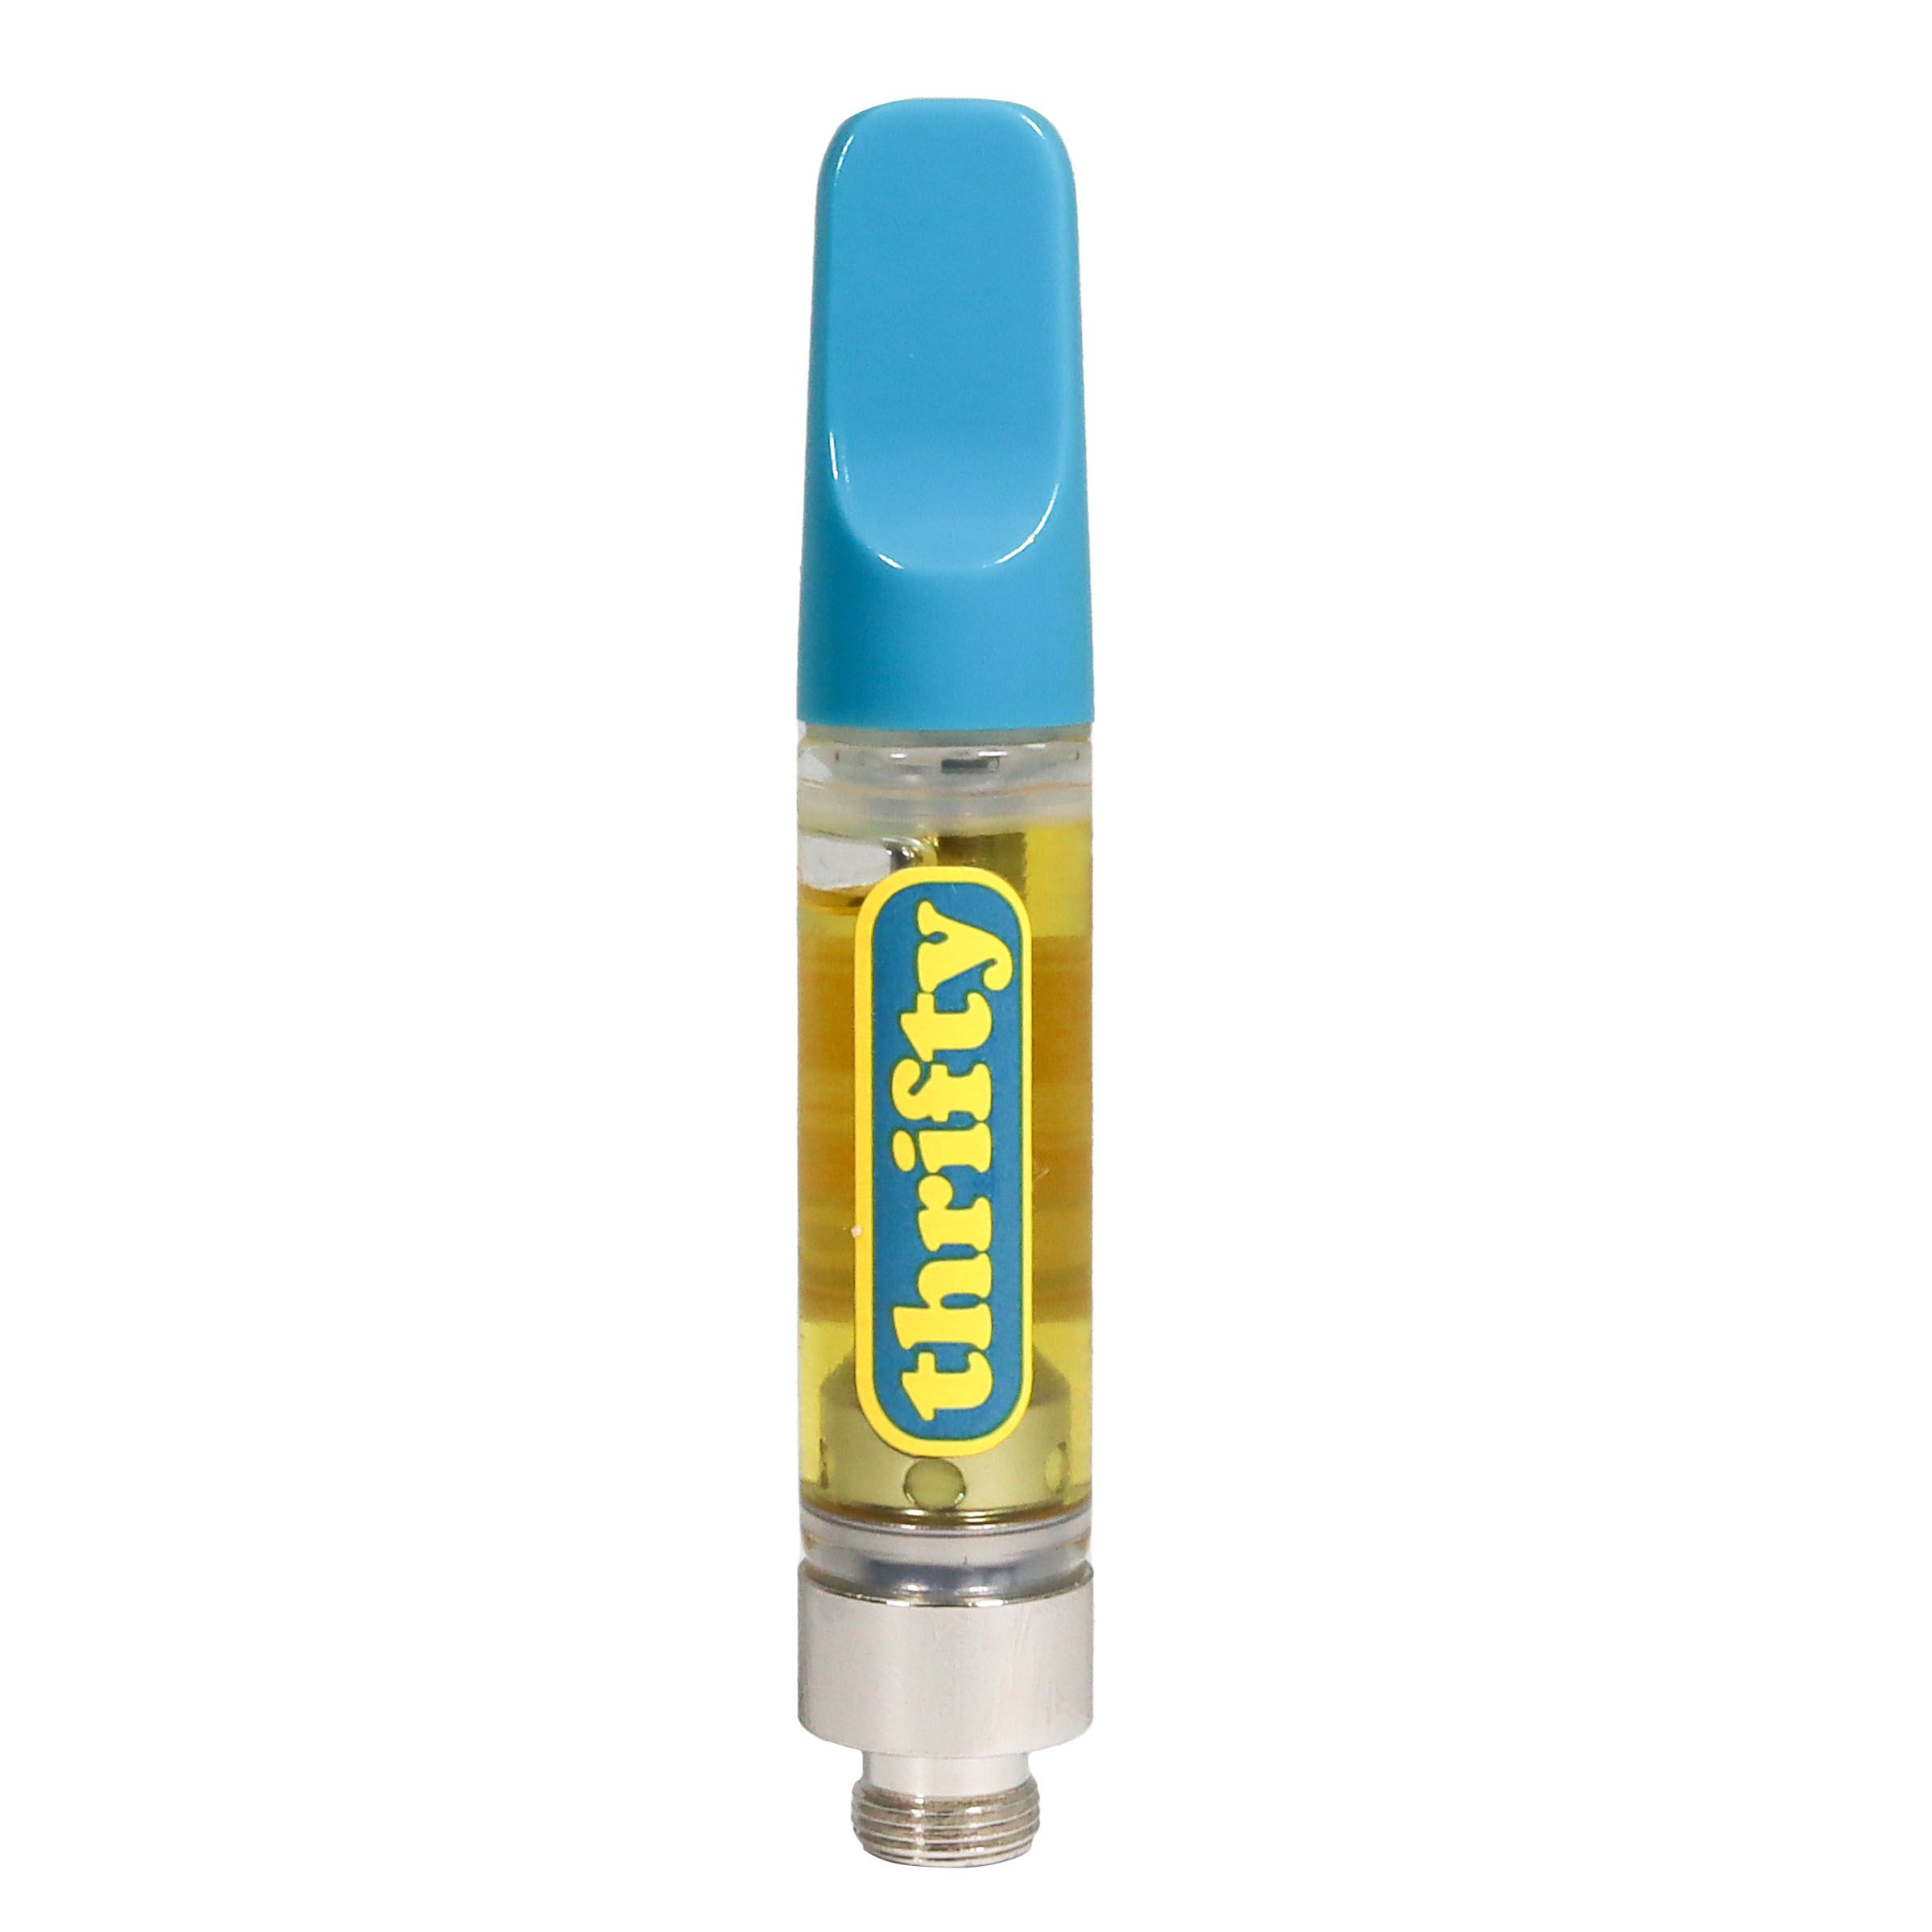 Cannabis Product Something Fruity 510 Thread Cartridge by Thrifty